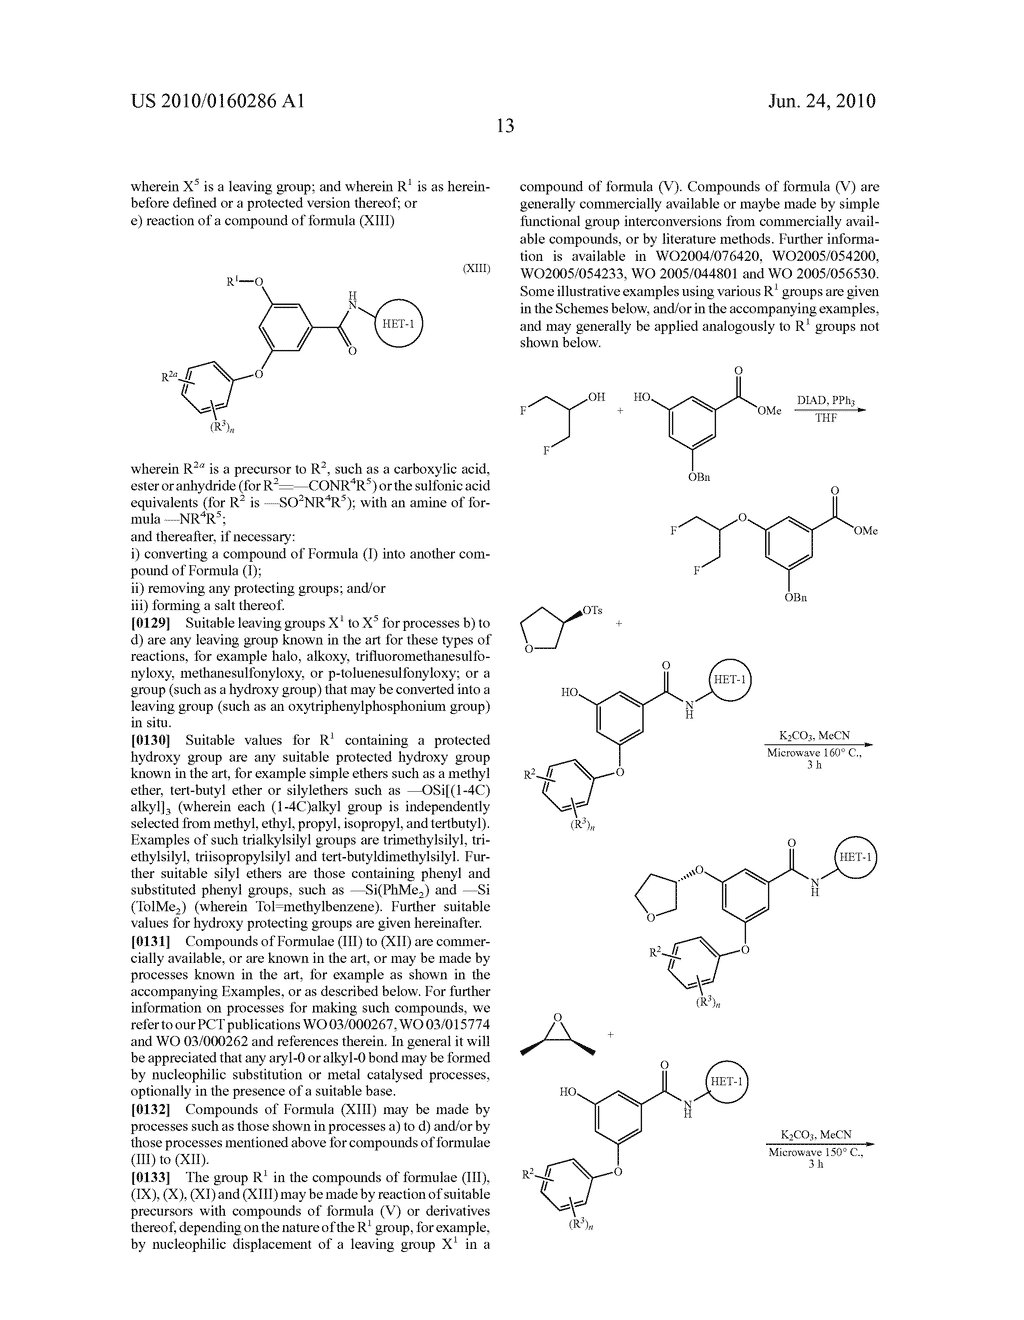 HETEROARYLCARBAMOYLBENZENE DERIVATIVES FOR THE TREATMENT OF DIABETES - diagram, schematic, and image 14